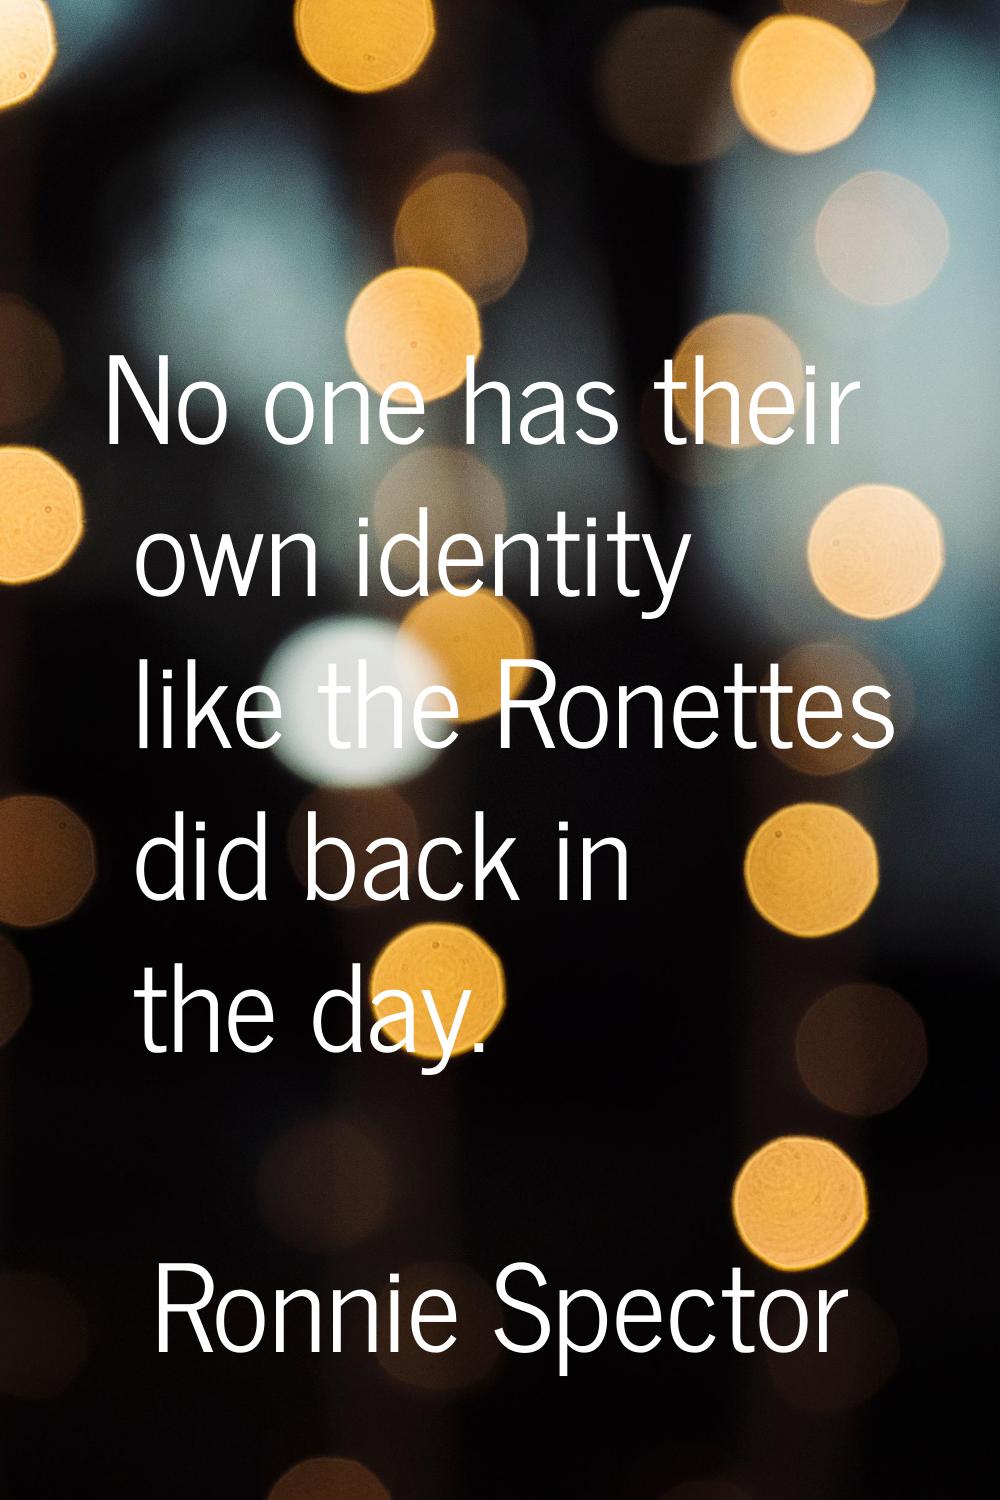 No one has their own identity like the Ronettes did back in the day.